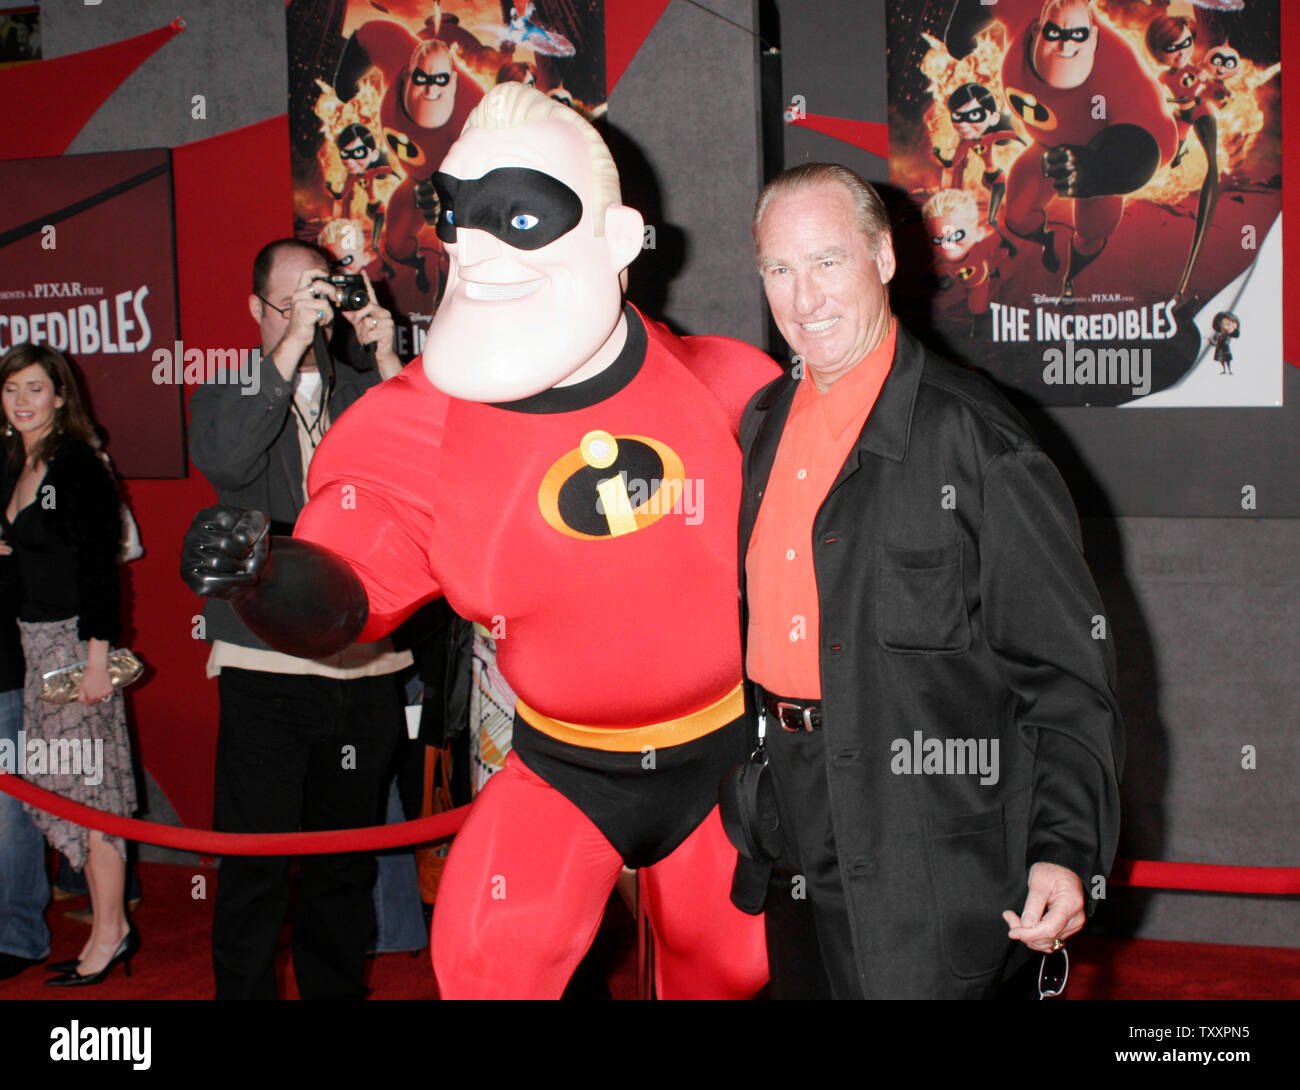 Actor Craig T. Nelson, right, who is the voice of the character, 'Mr. Incredilbe', poses for photographers with a costumed actor dressed as 'Mr. Incredible'  at the premiere of the new animated film from Pixar, 'The Incredibles' at the El Capitan Theatre in Los Angeles,  October 24, 2004. The film opens in the United States November 5th. (UPI Photo/Francis Specker) Stock Photo